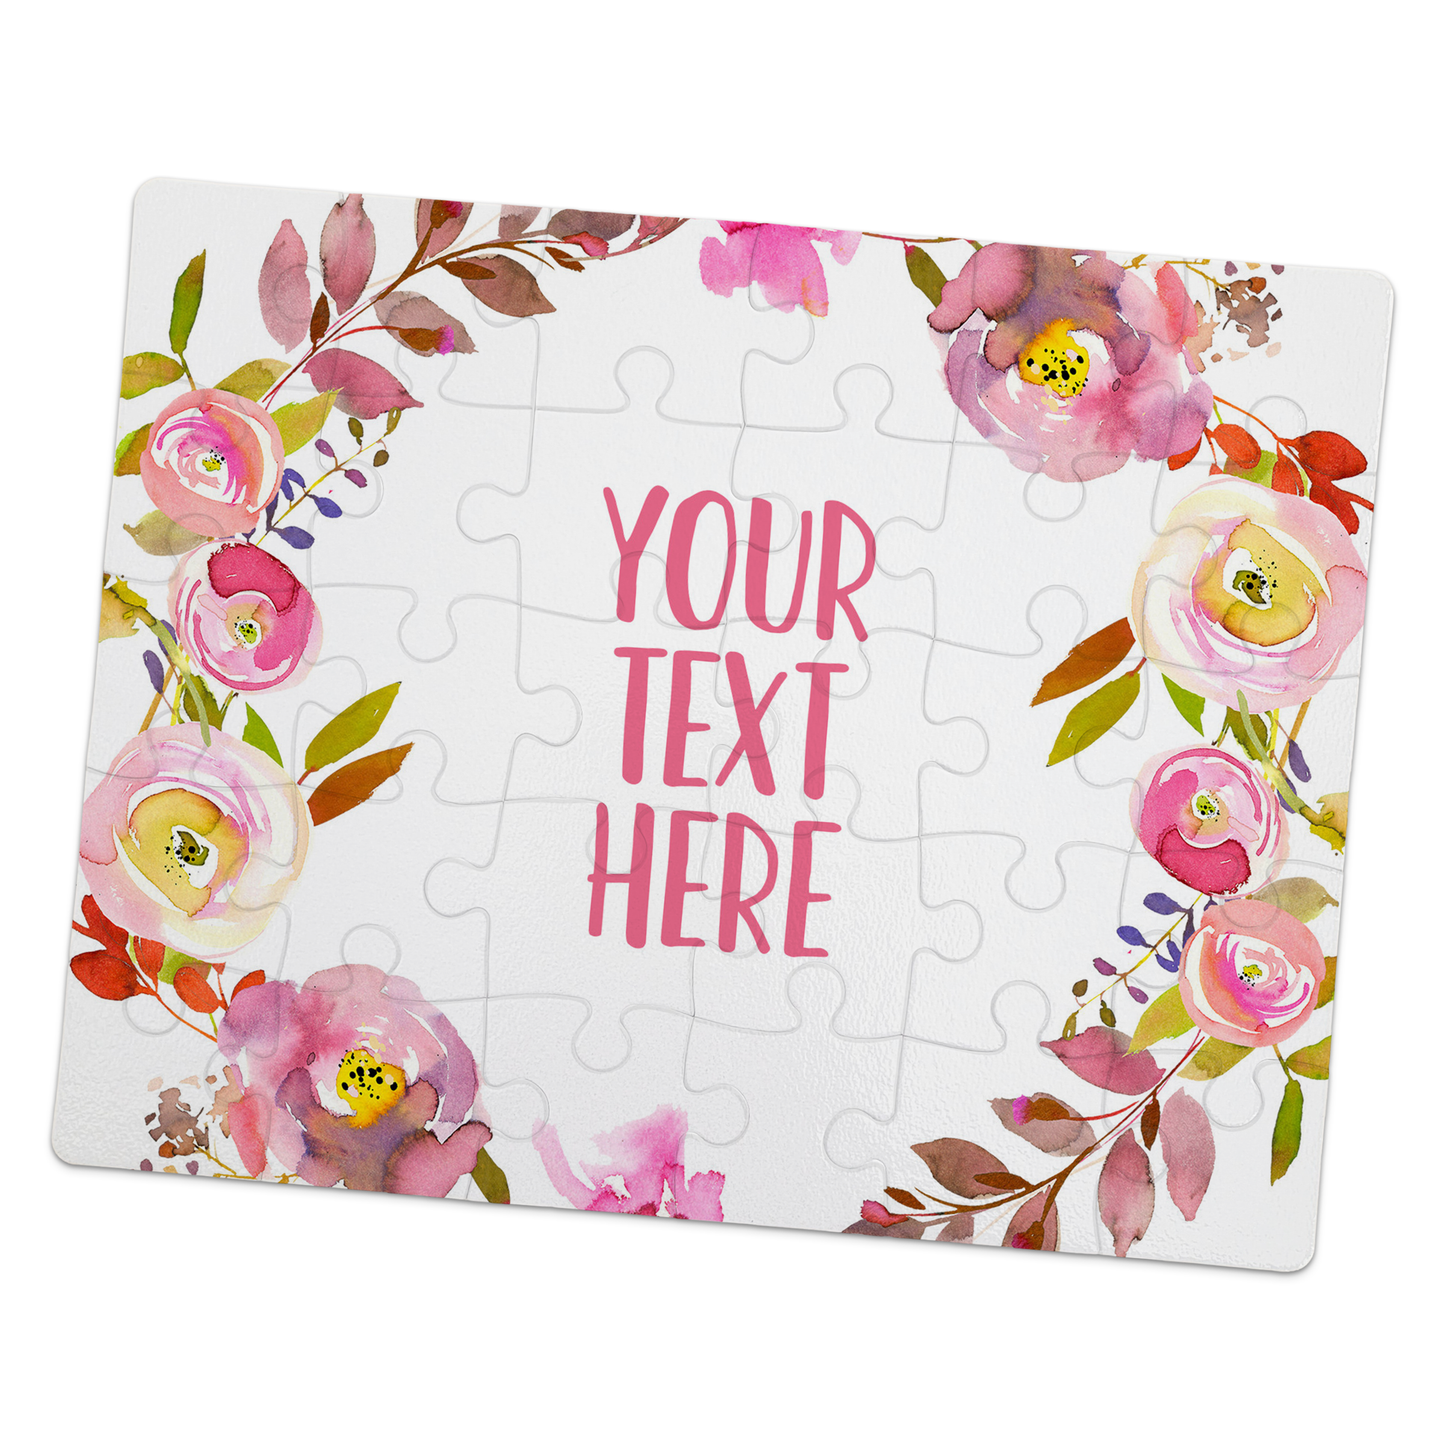 Create Your Own Puzzle - Floral Design - CYOP0132